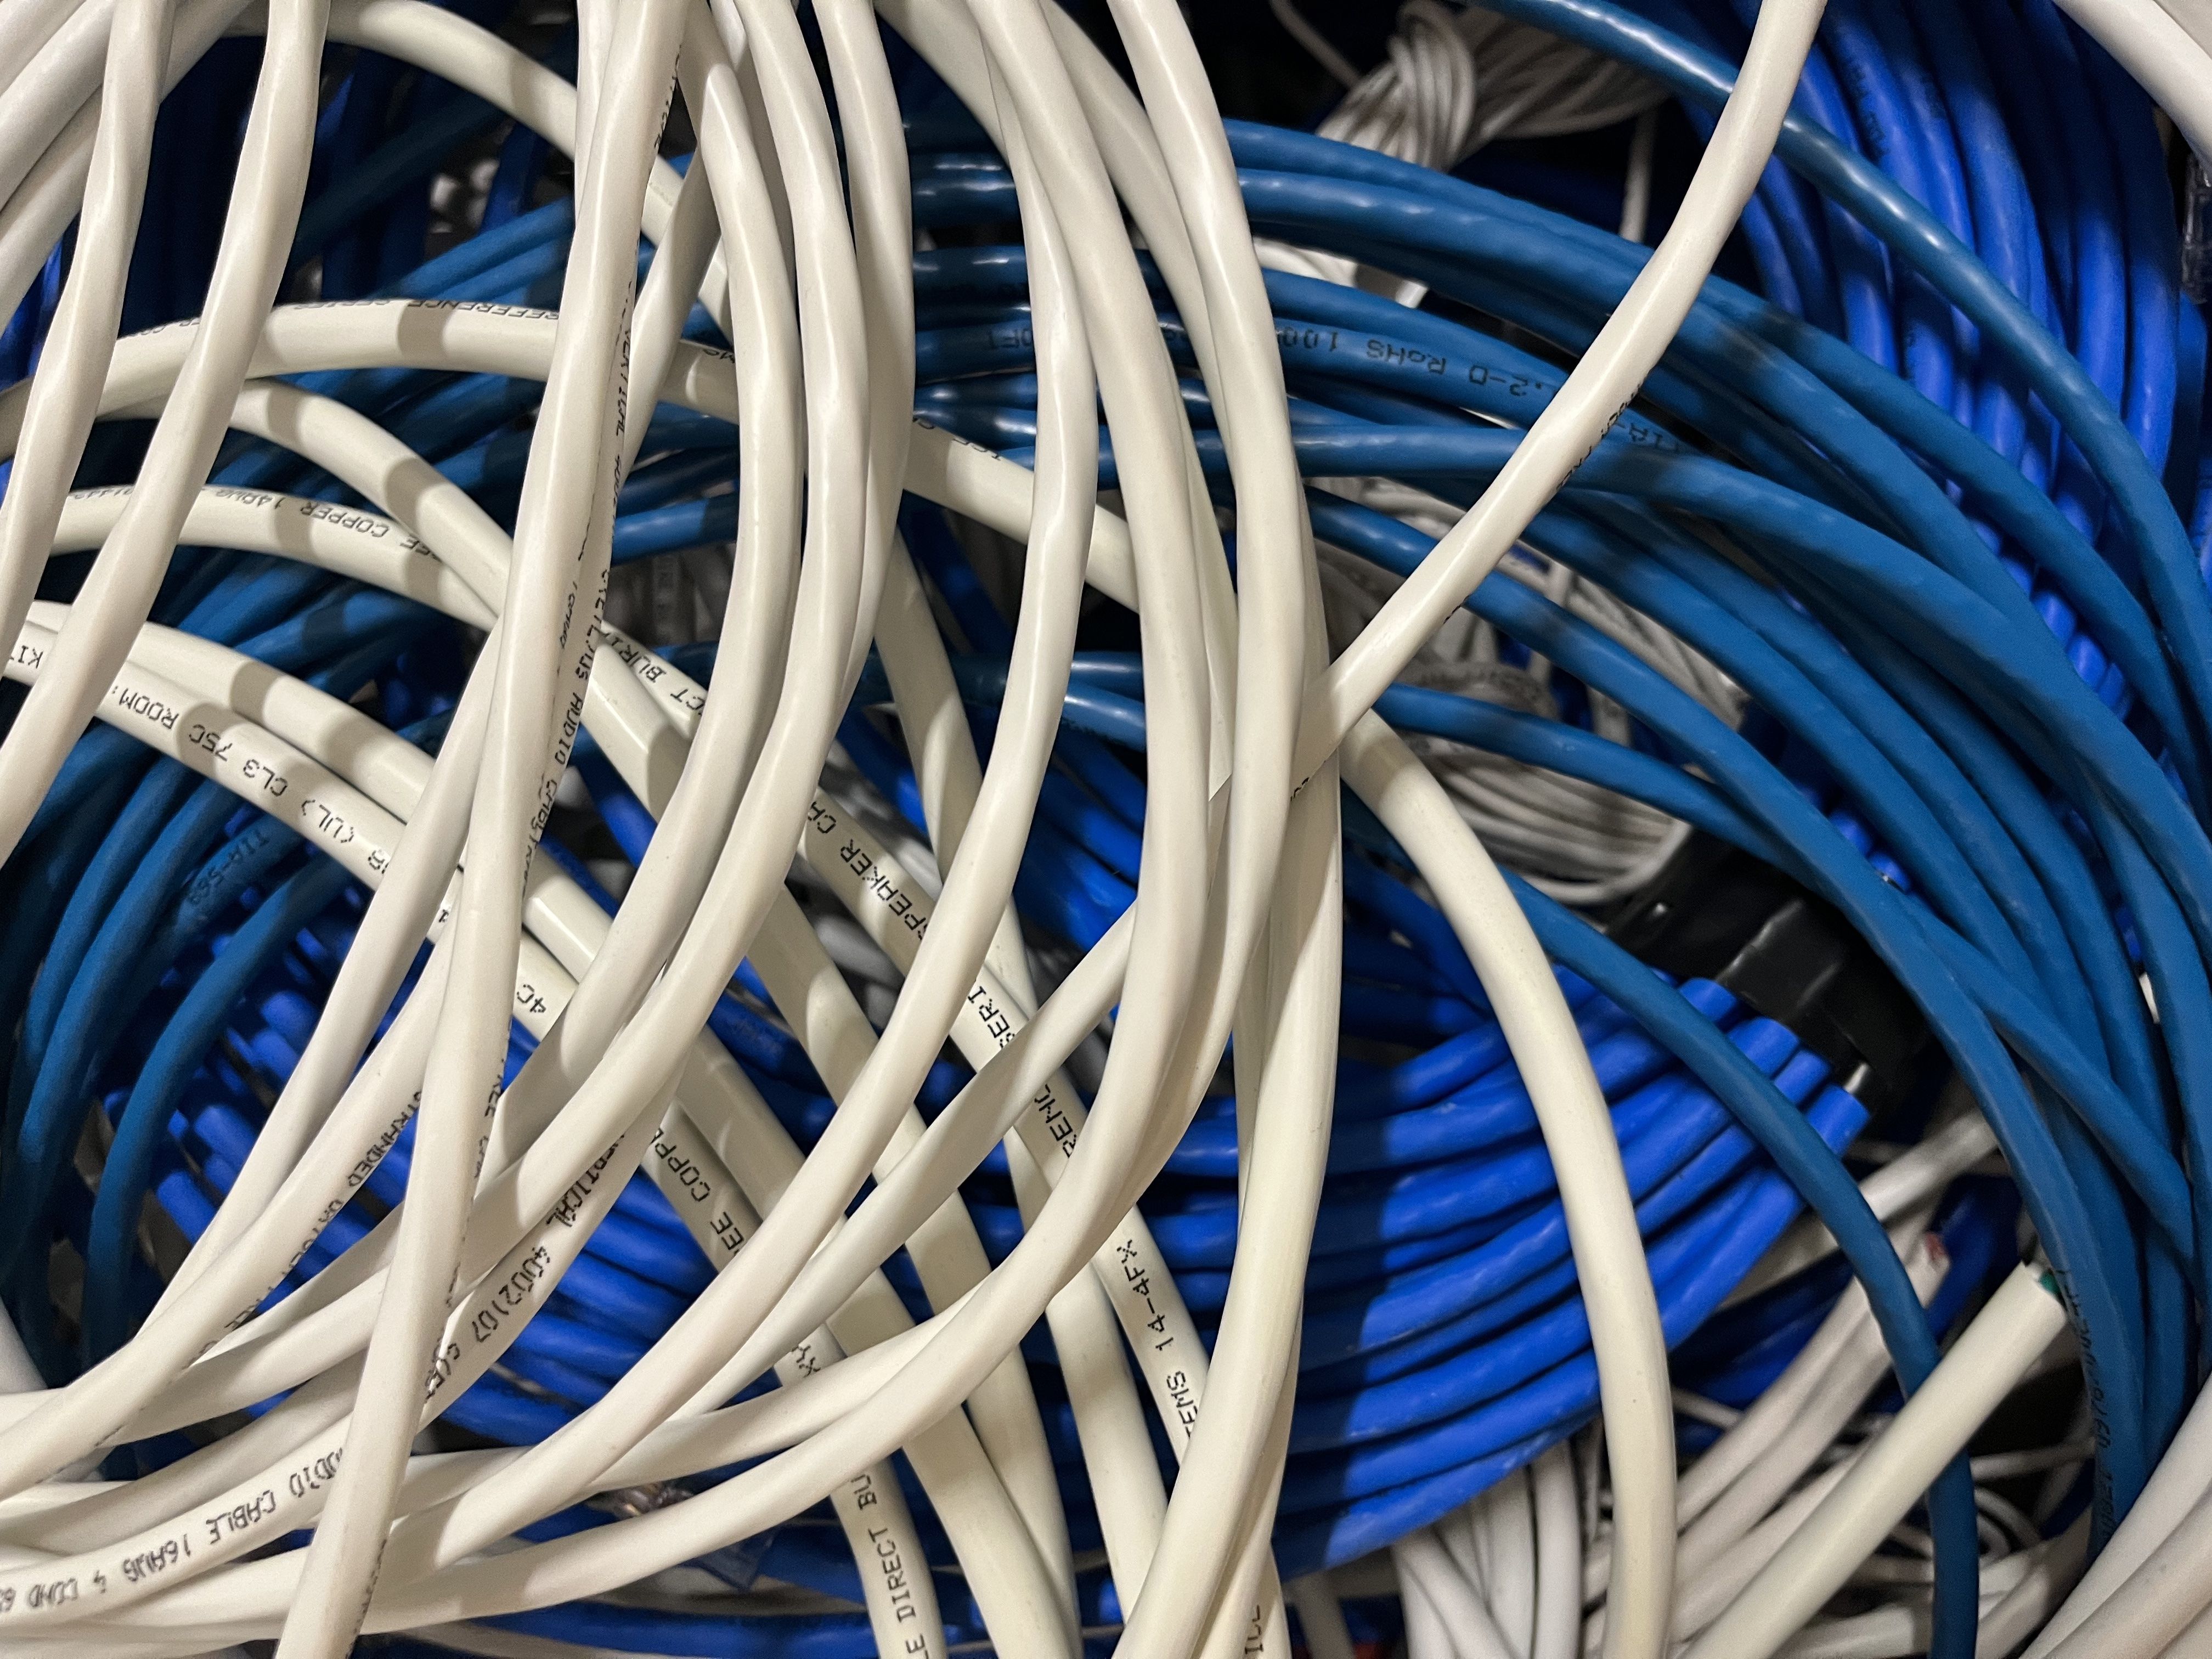 Box of Ethernet Cables